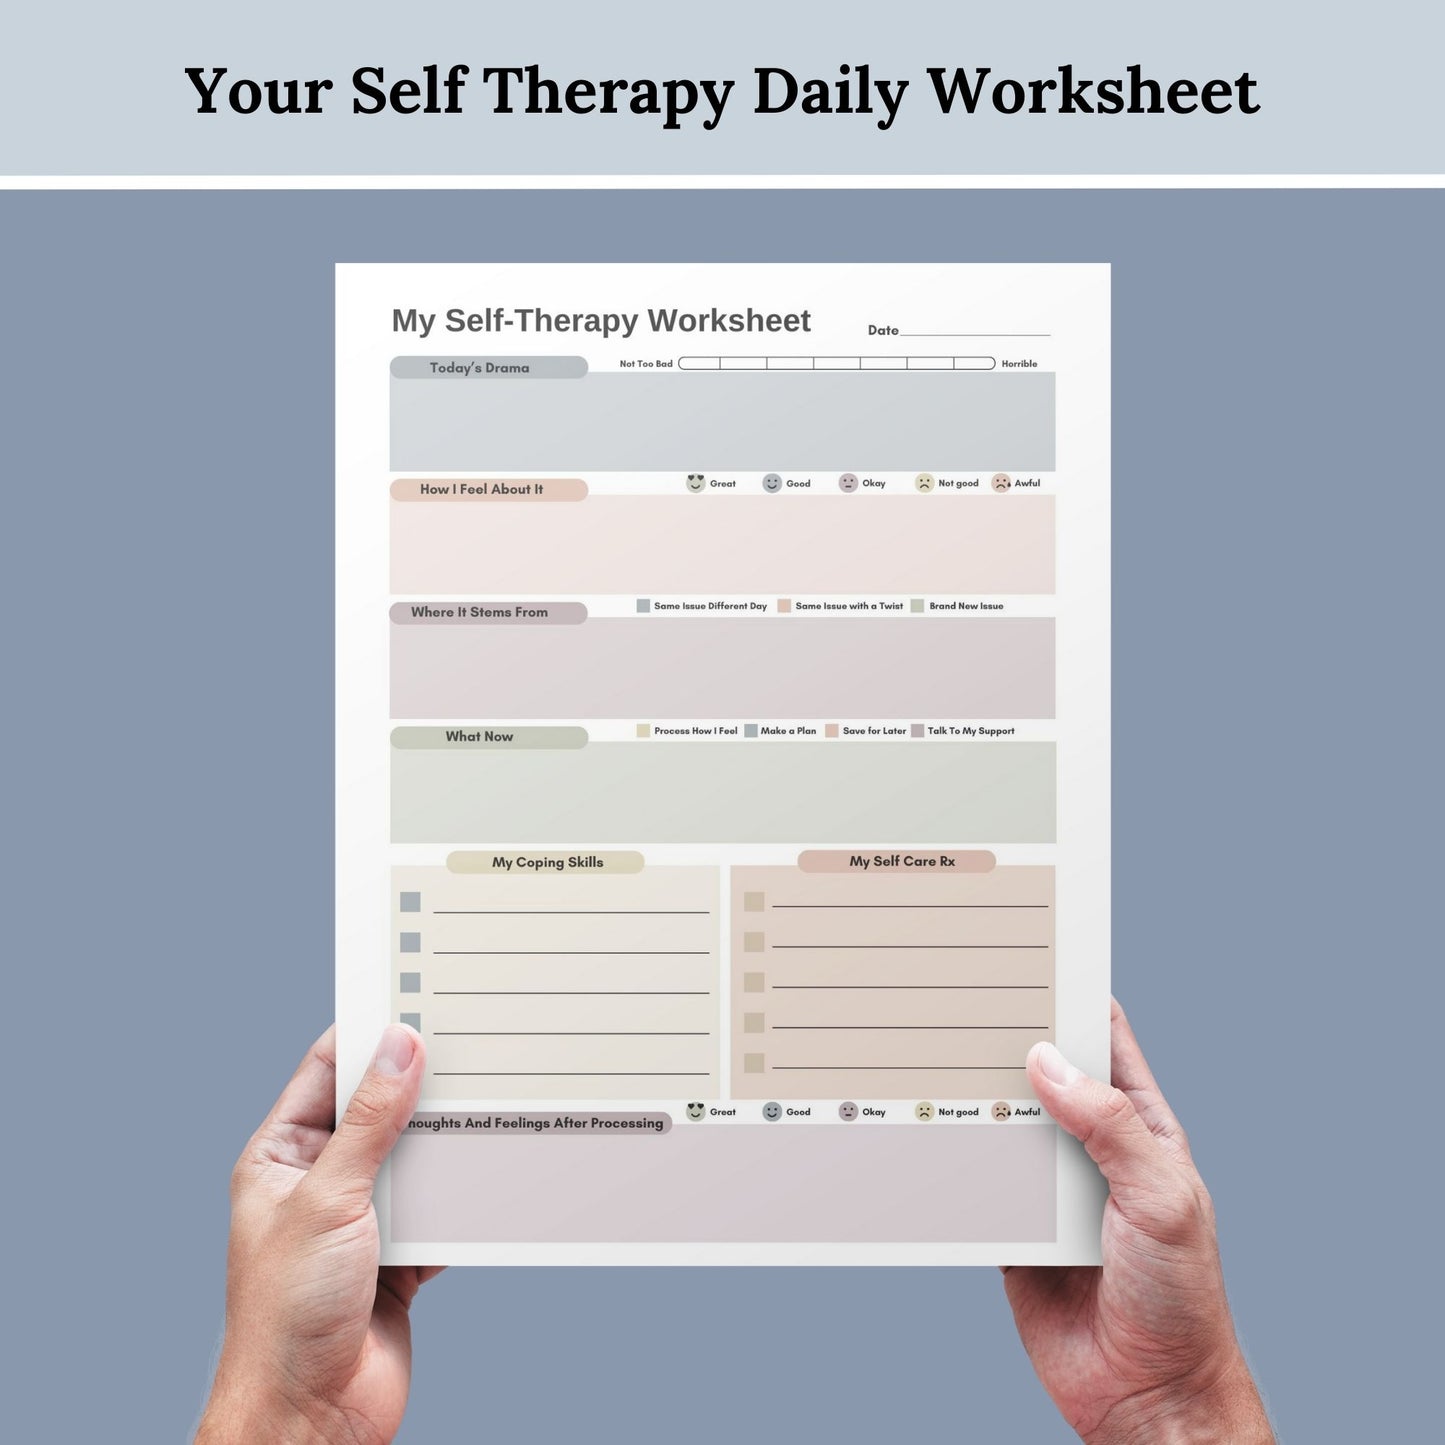 CBT worksheet for self-therapy, self-care, and processing anxiety and life stressors.  This therapy journal page with structured prompts empowers you to process challenges, develop healthier thought patterns